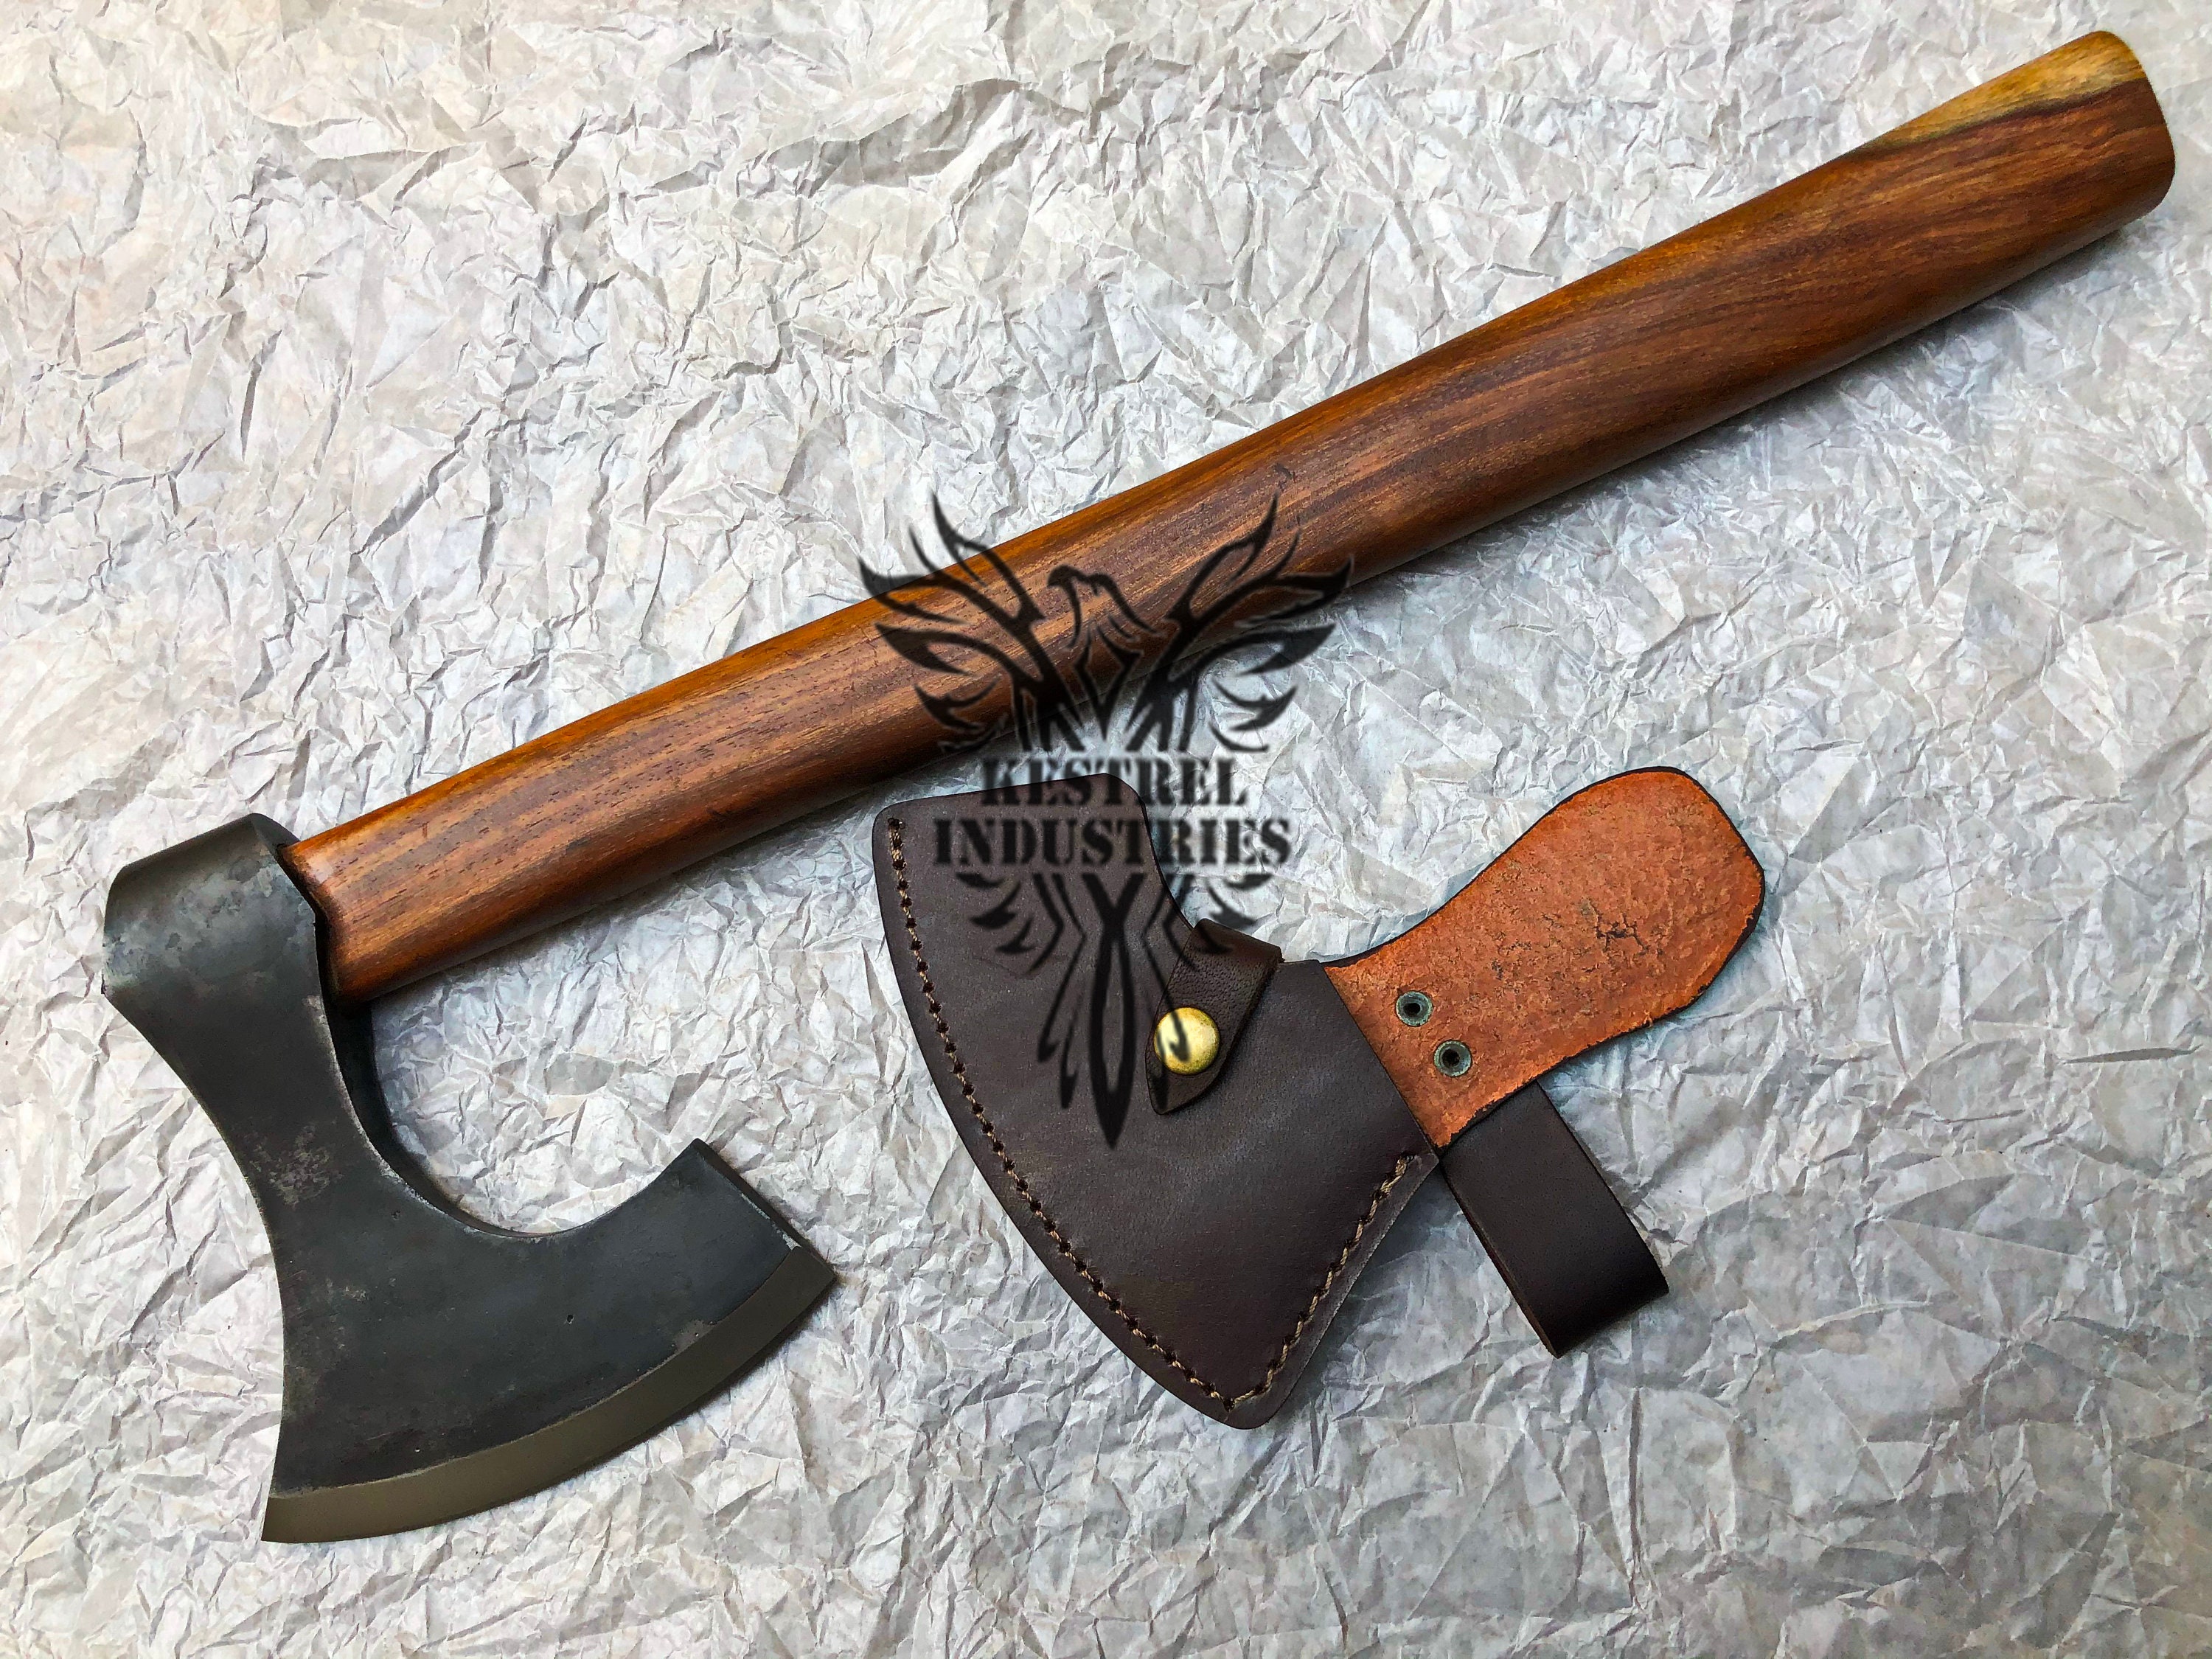 Smith Carbon Steel Viking Axes Rose Wood Bearded Camping Axe For Xmas Gifts 2021